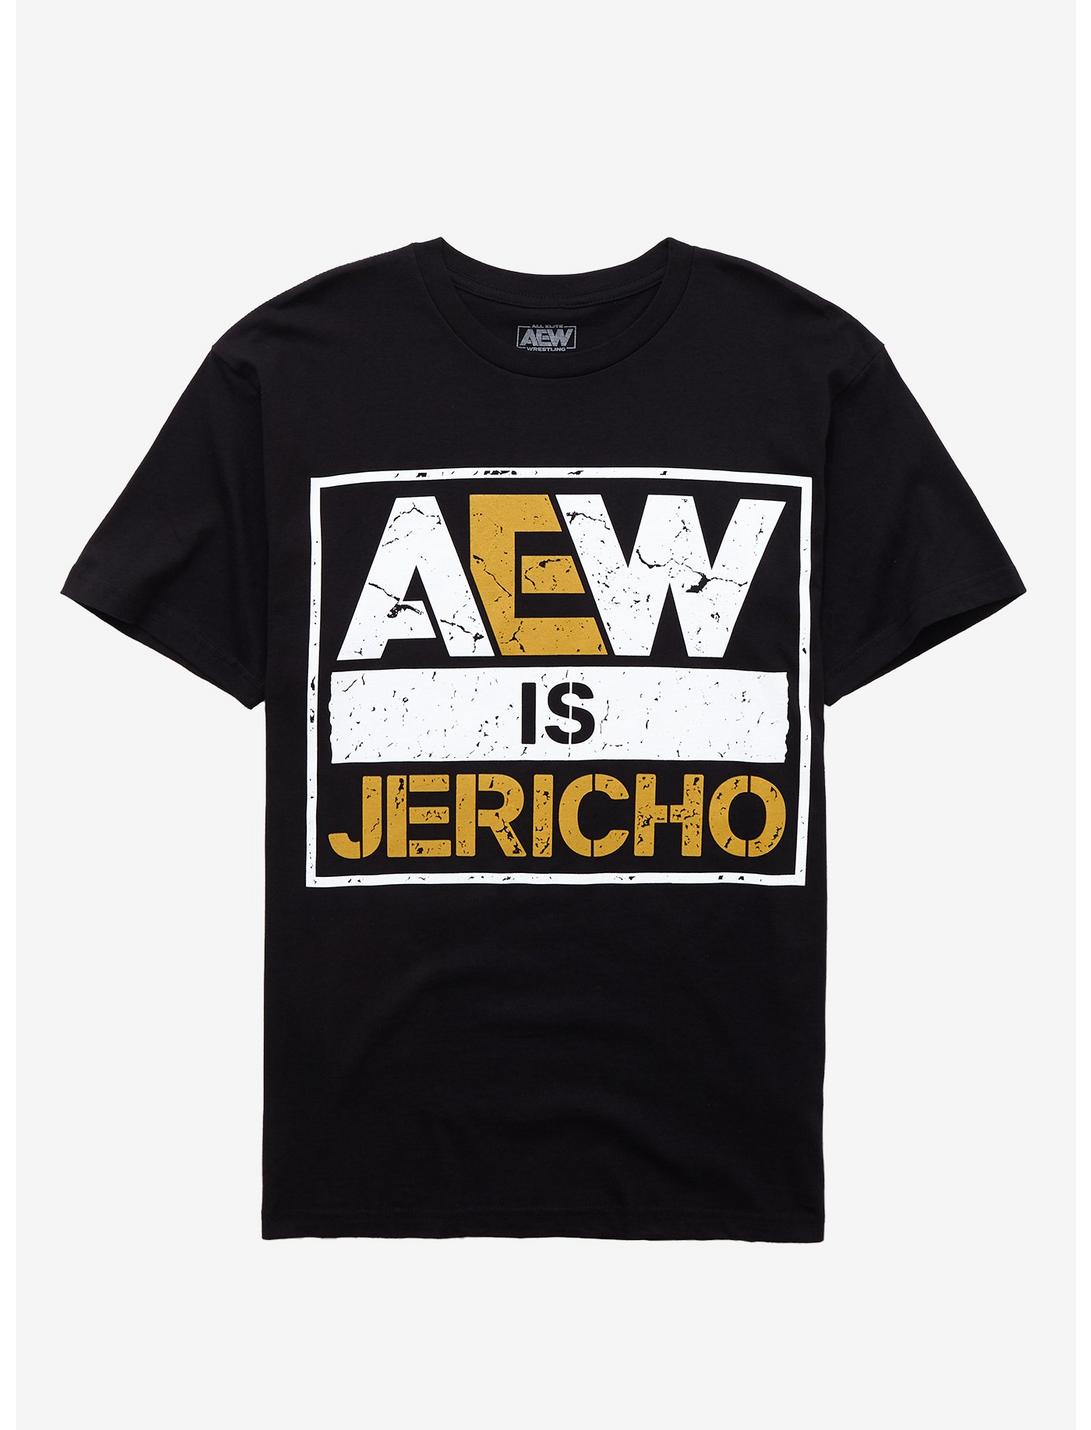 All Elite Wrestling Official AEW Chris Jericho AEW is Jericho T-Shirt